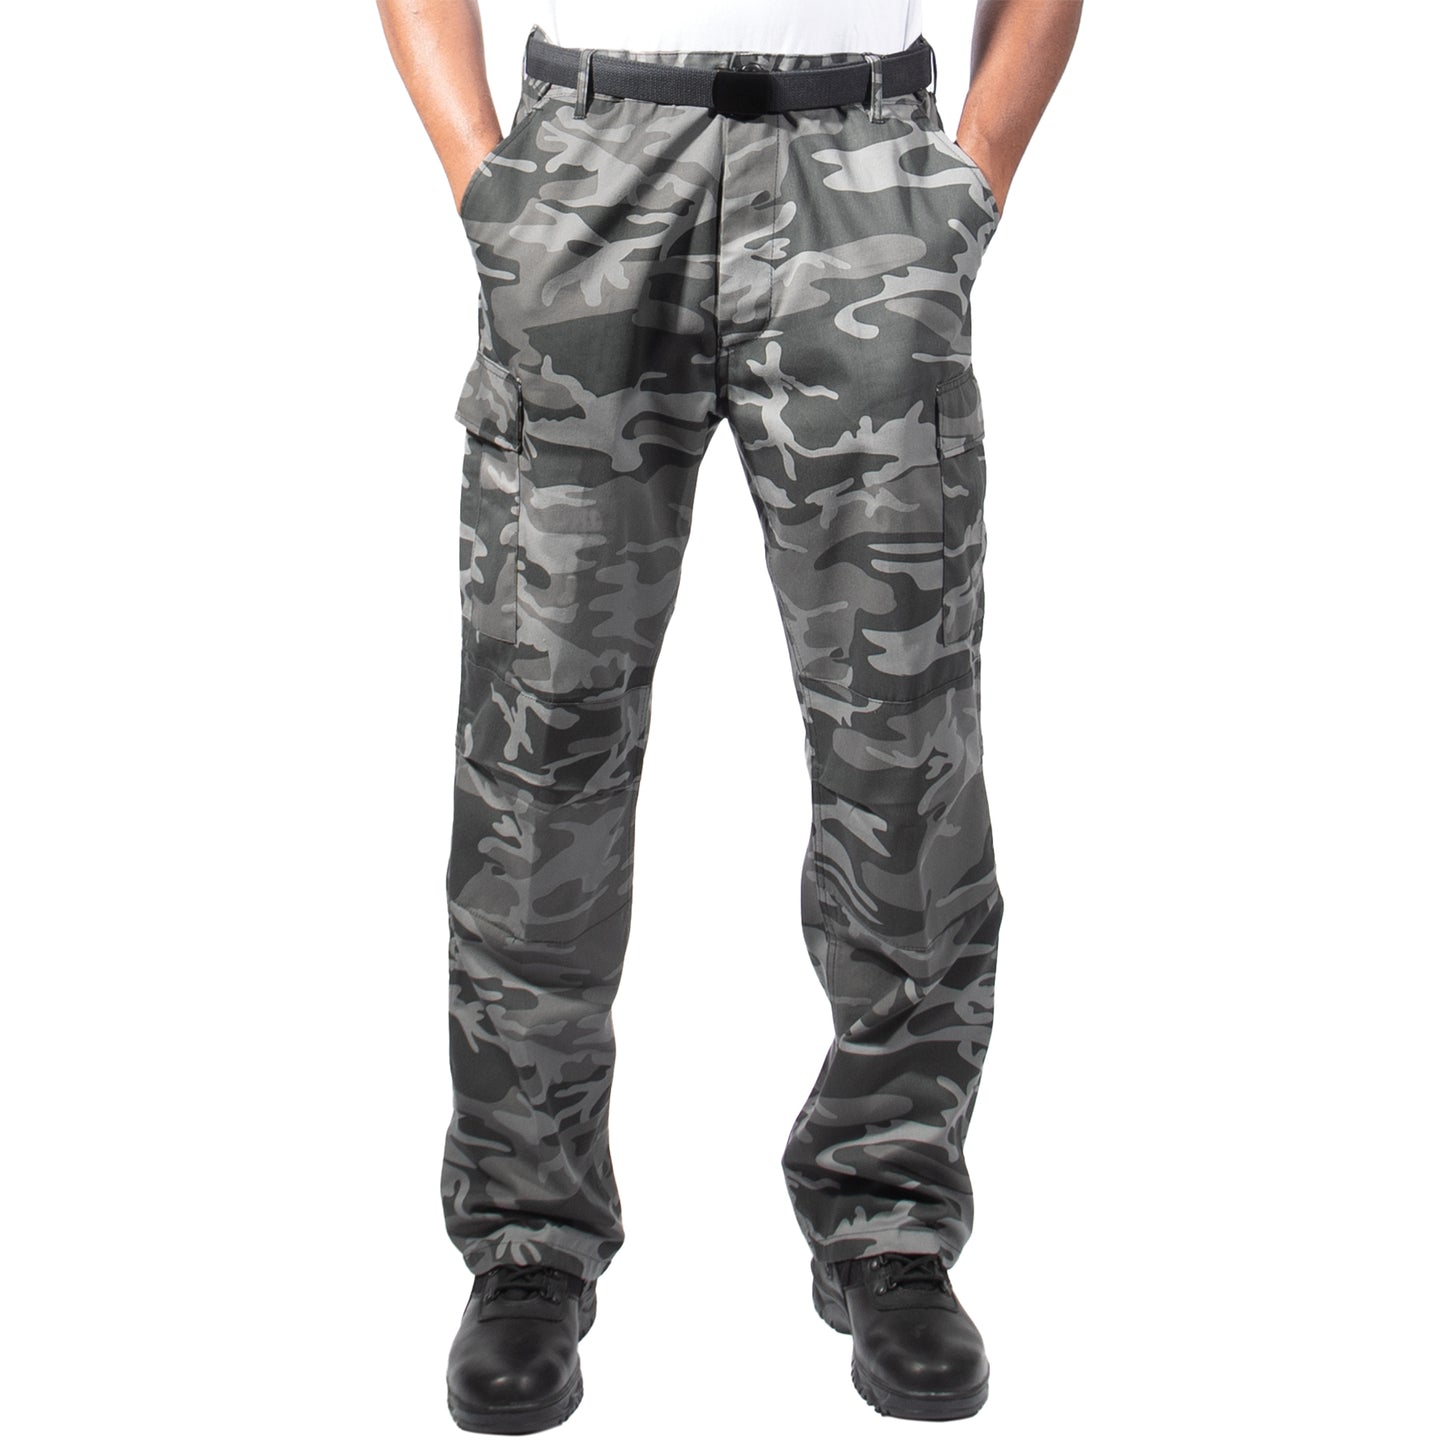 Relaxed Fit Zipper Fly BDU Cargo Pants Army Fatigues City Camo or Black Camo